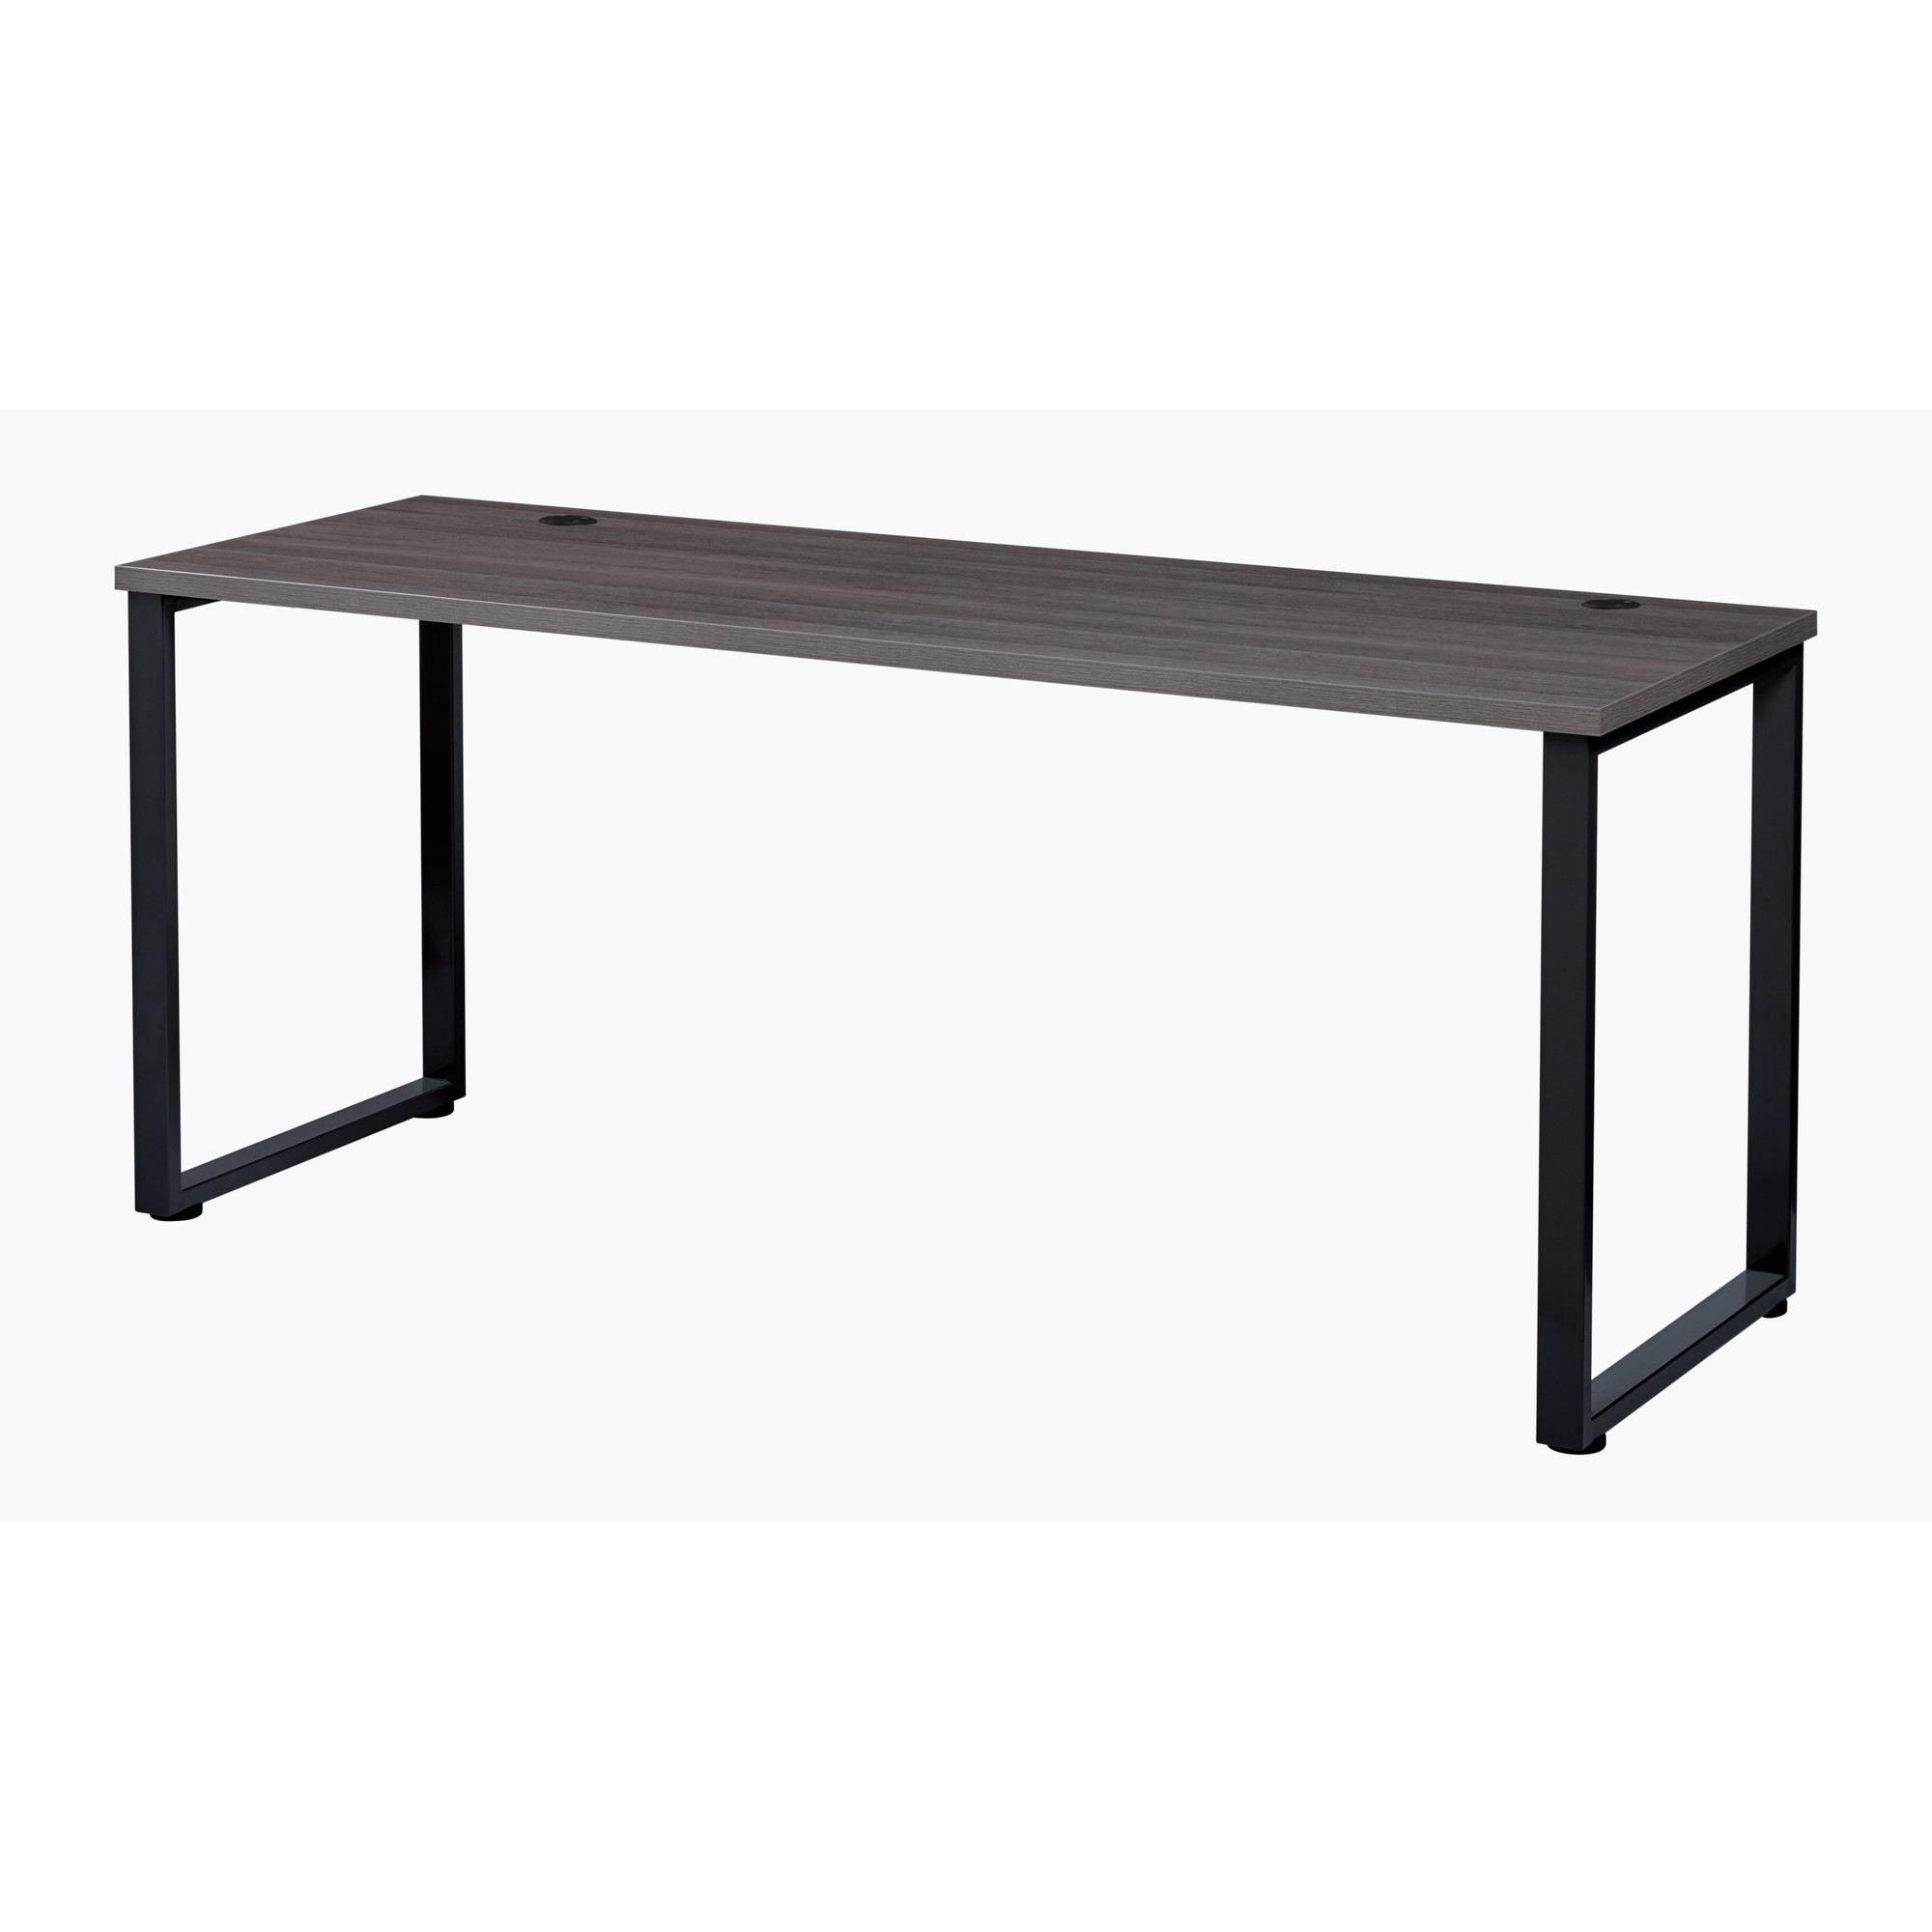 Hirsh Industries, Office Dimensions Open Desk with O-leg, Width 59 in, Height 29.9 in, Depth 29.5 in, Model 24784